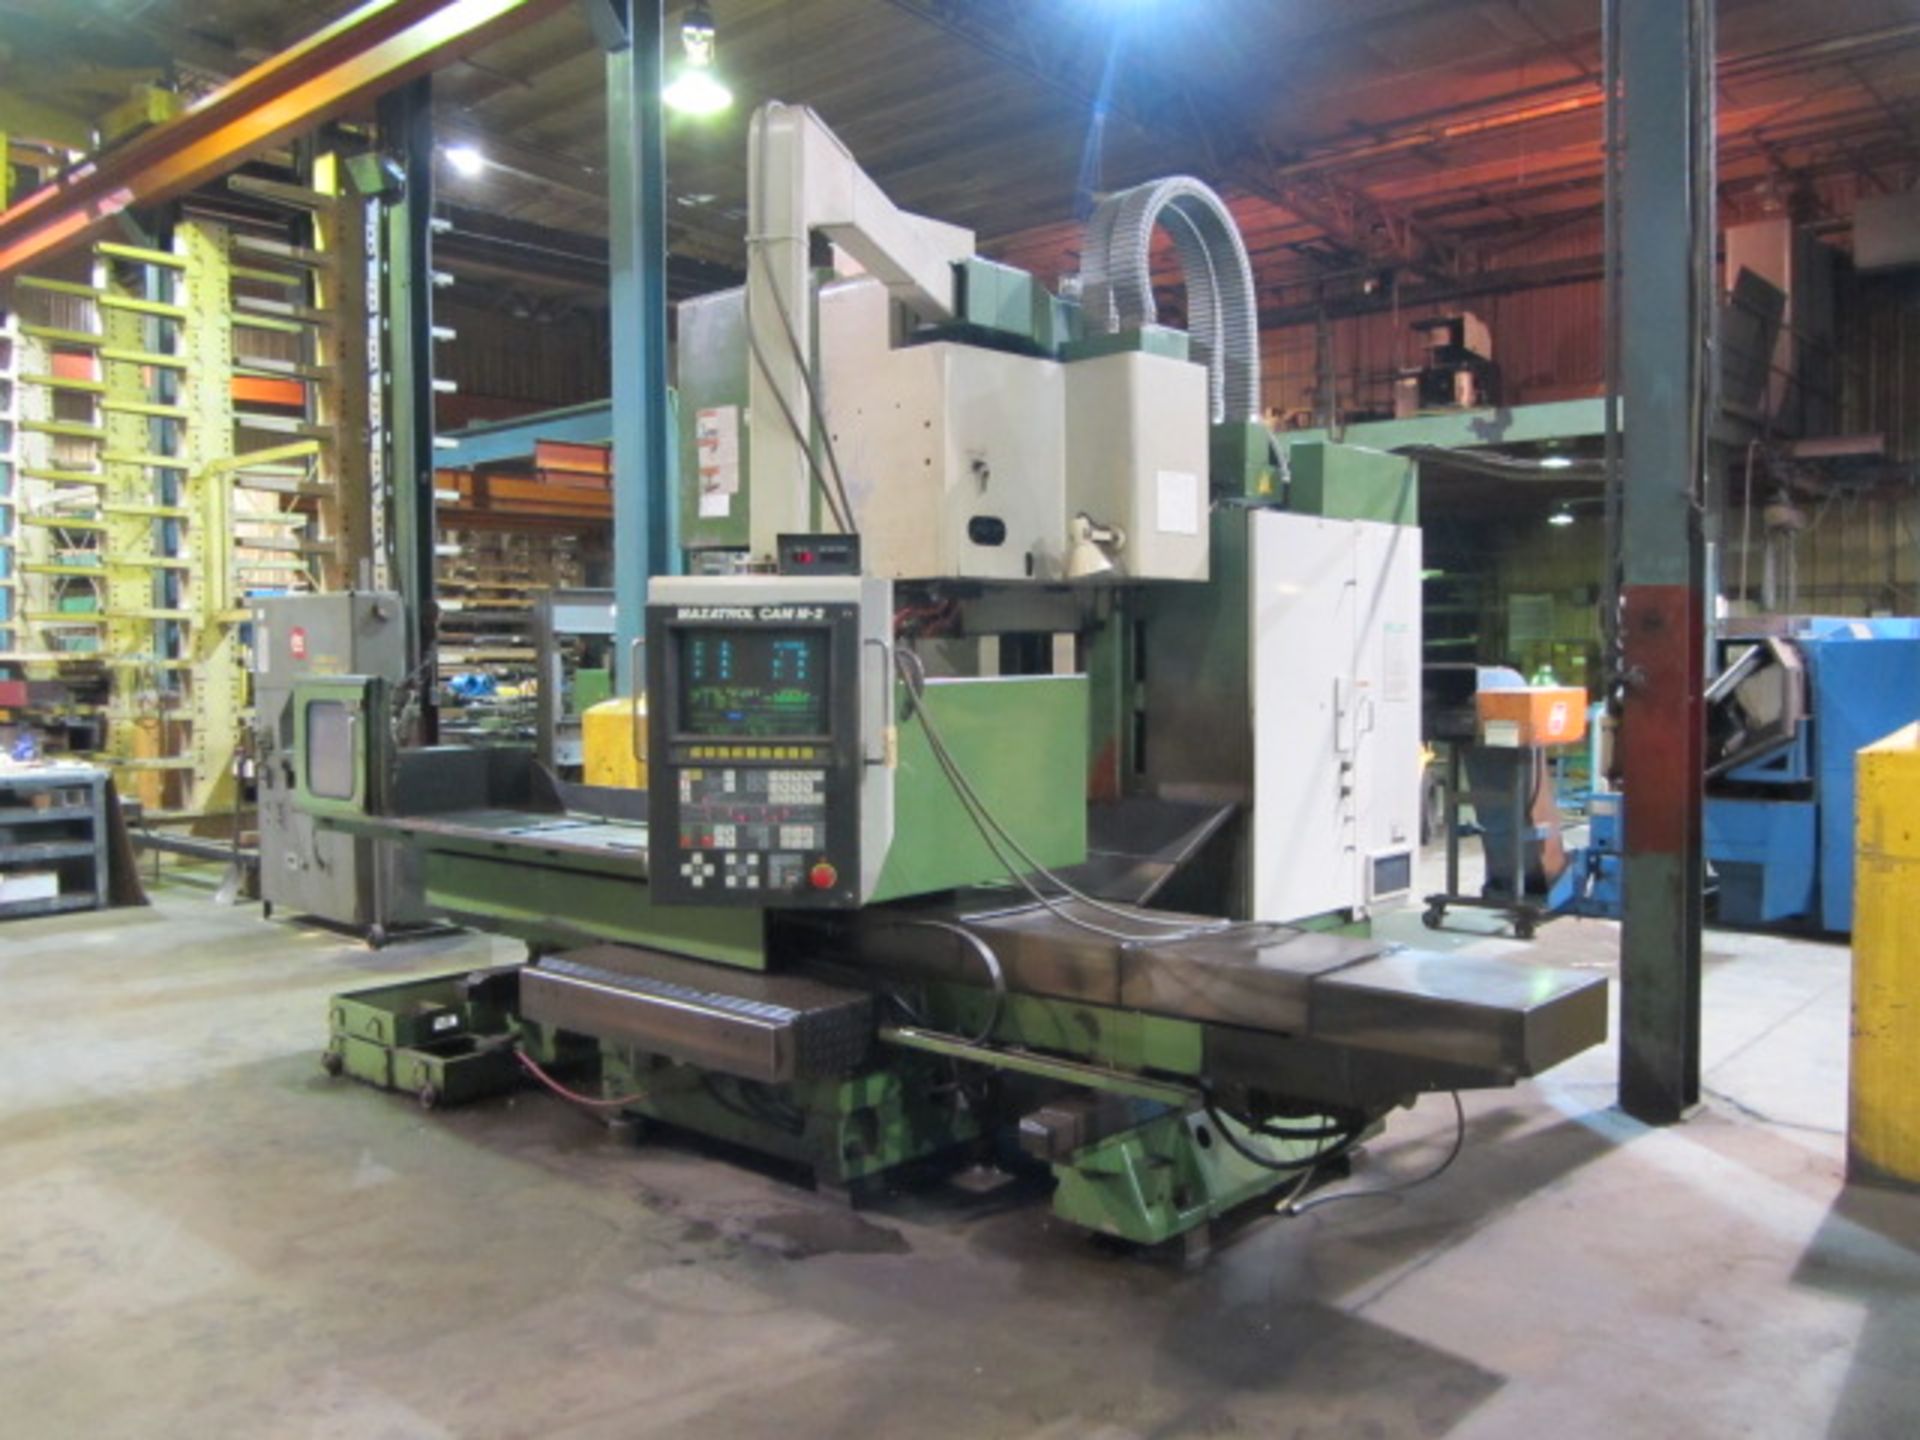 Mazak Model SV-20 Large Capacity CNC Vertical Machining Center with #50 Taper Spindle Speeds to 3600 - Image 4 of 8